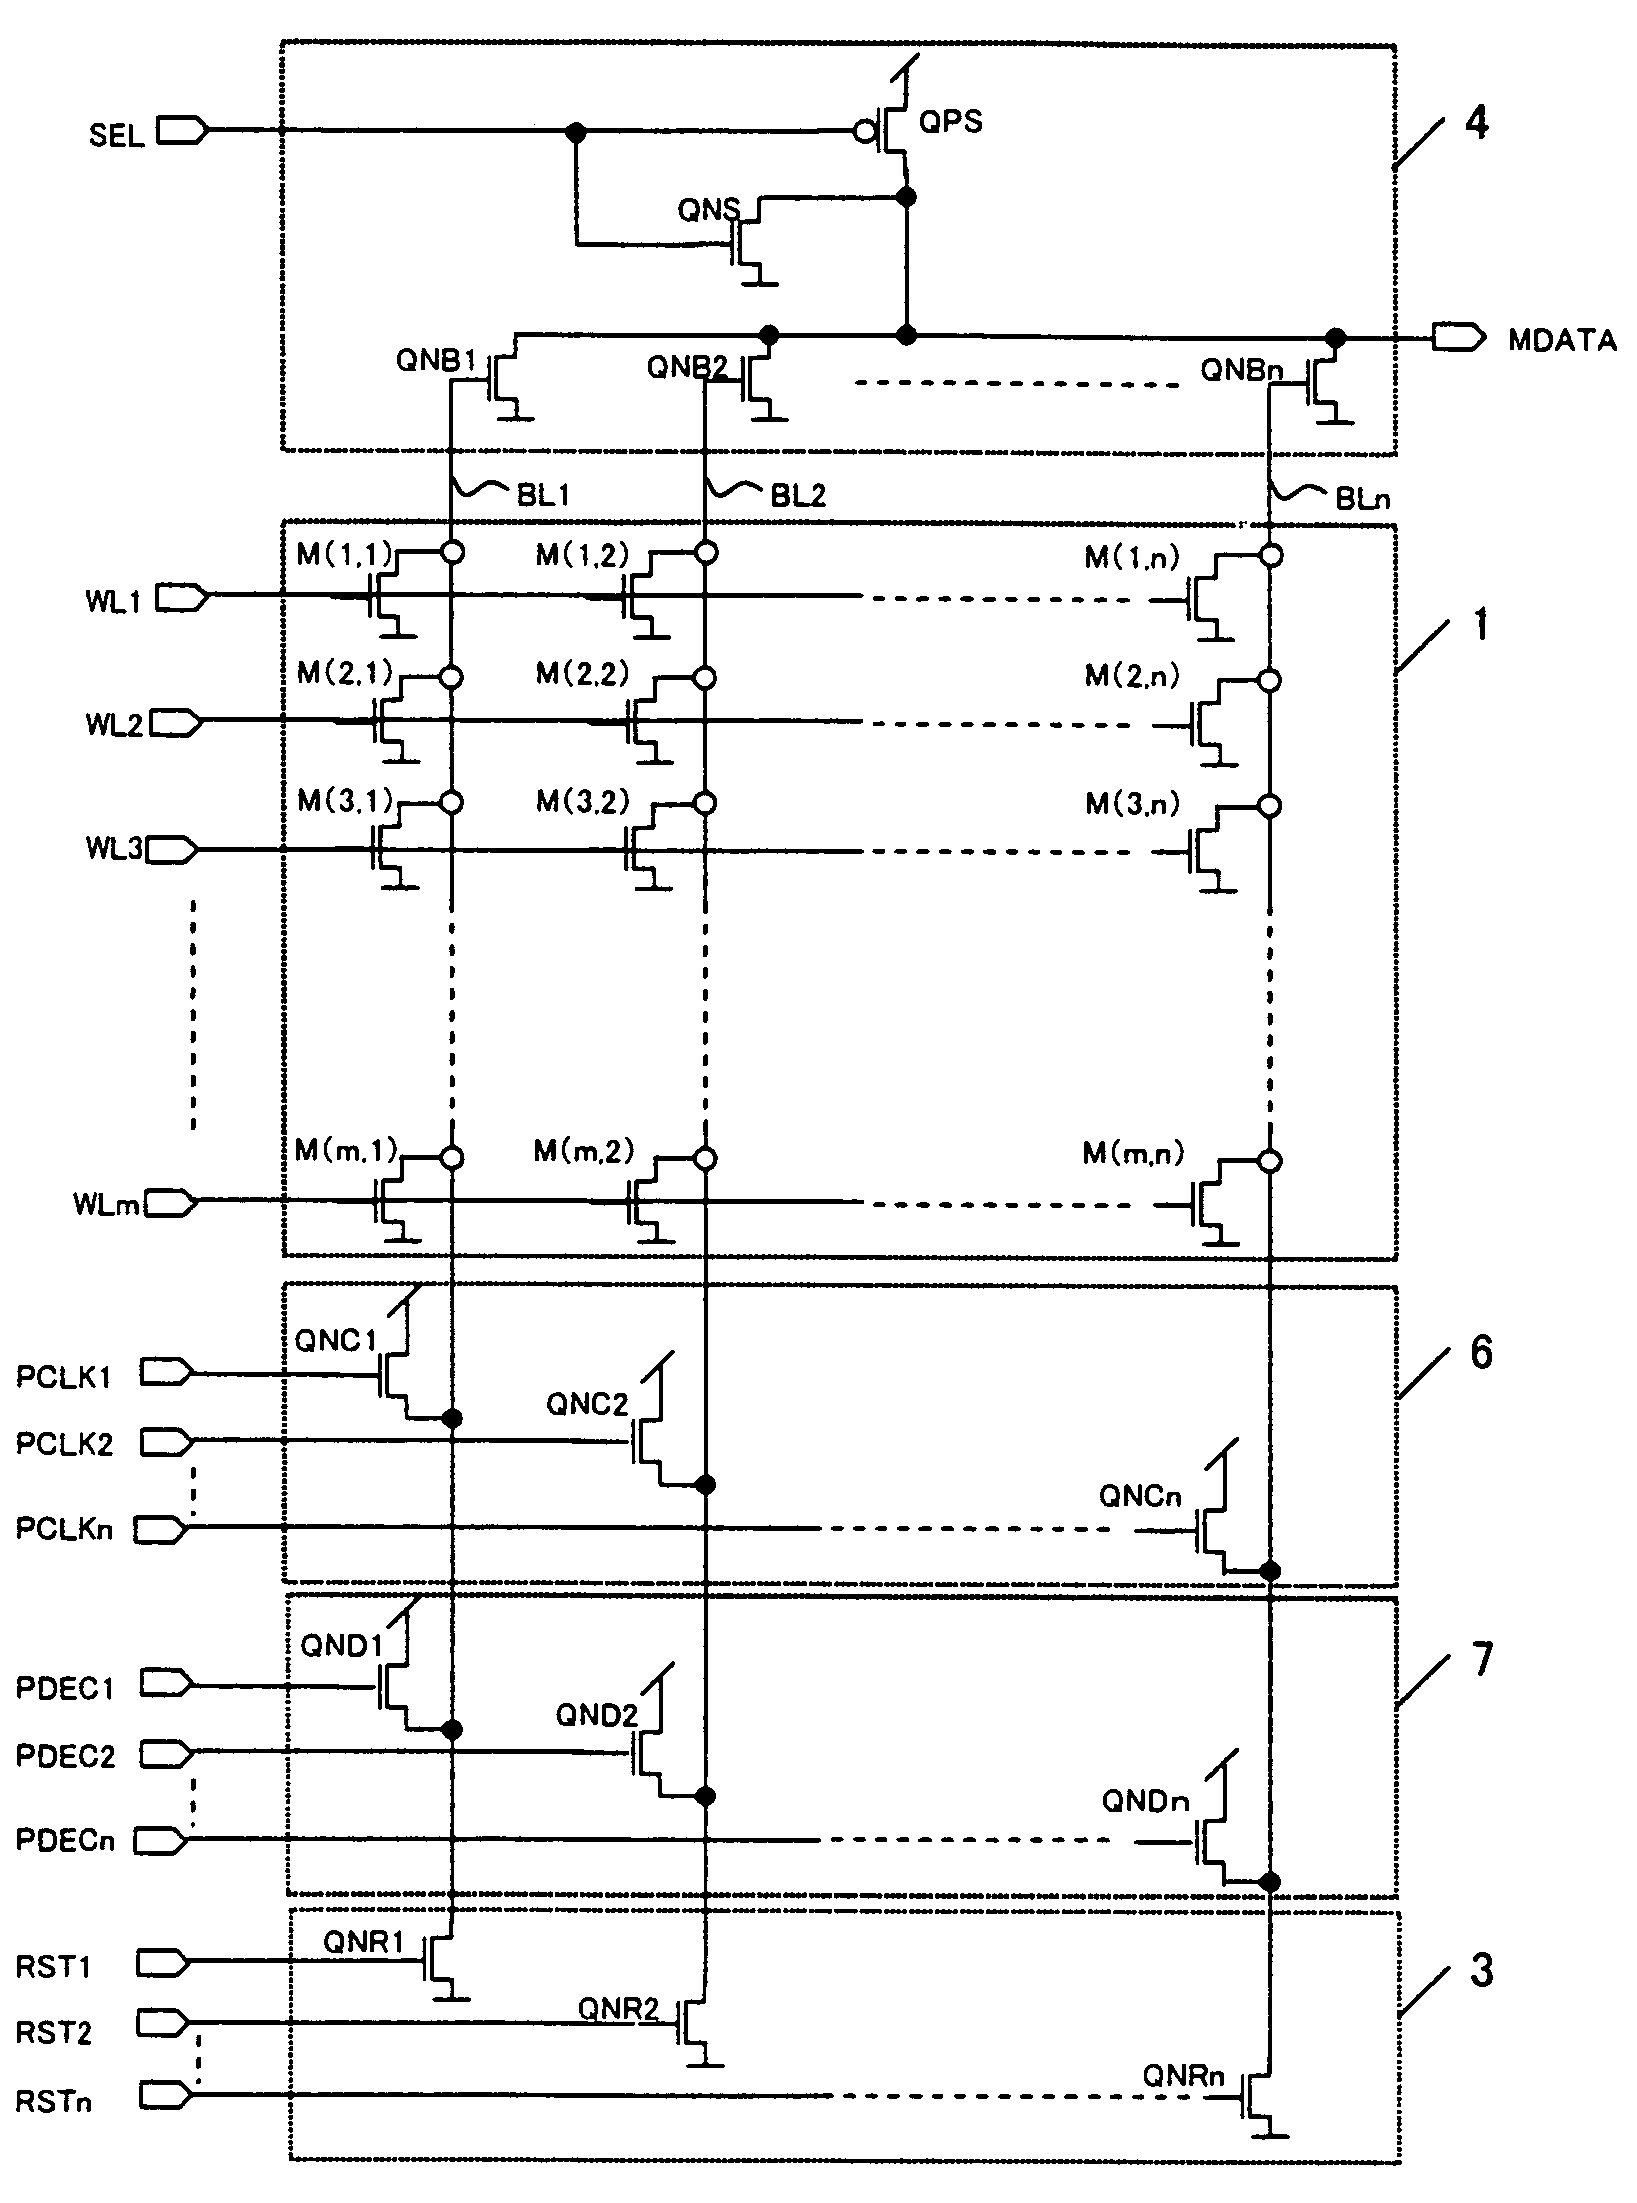 Semiconductor memory device having bit line precharge circuit controlled by address decoded signals